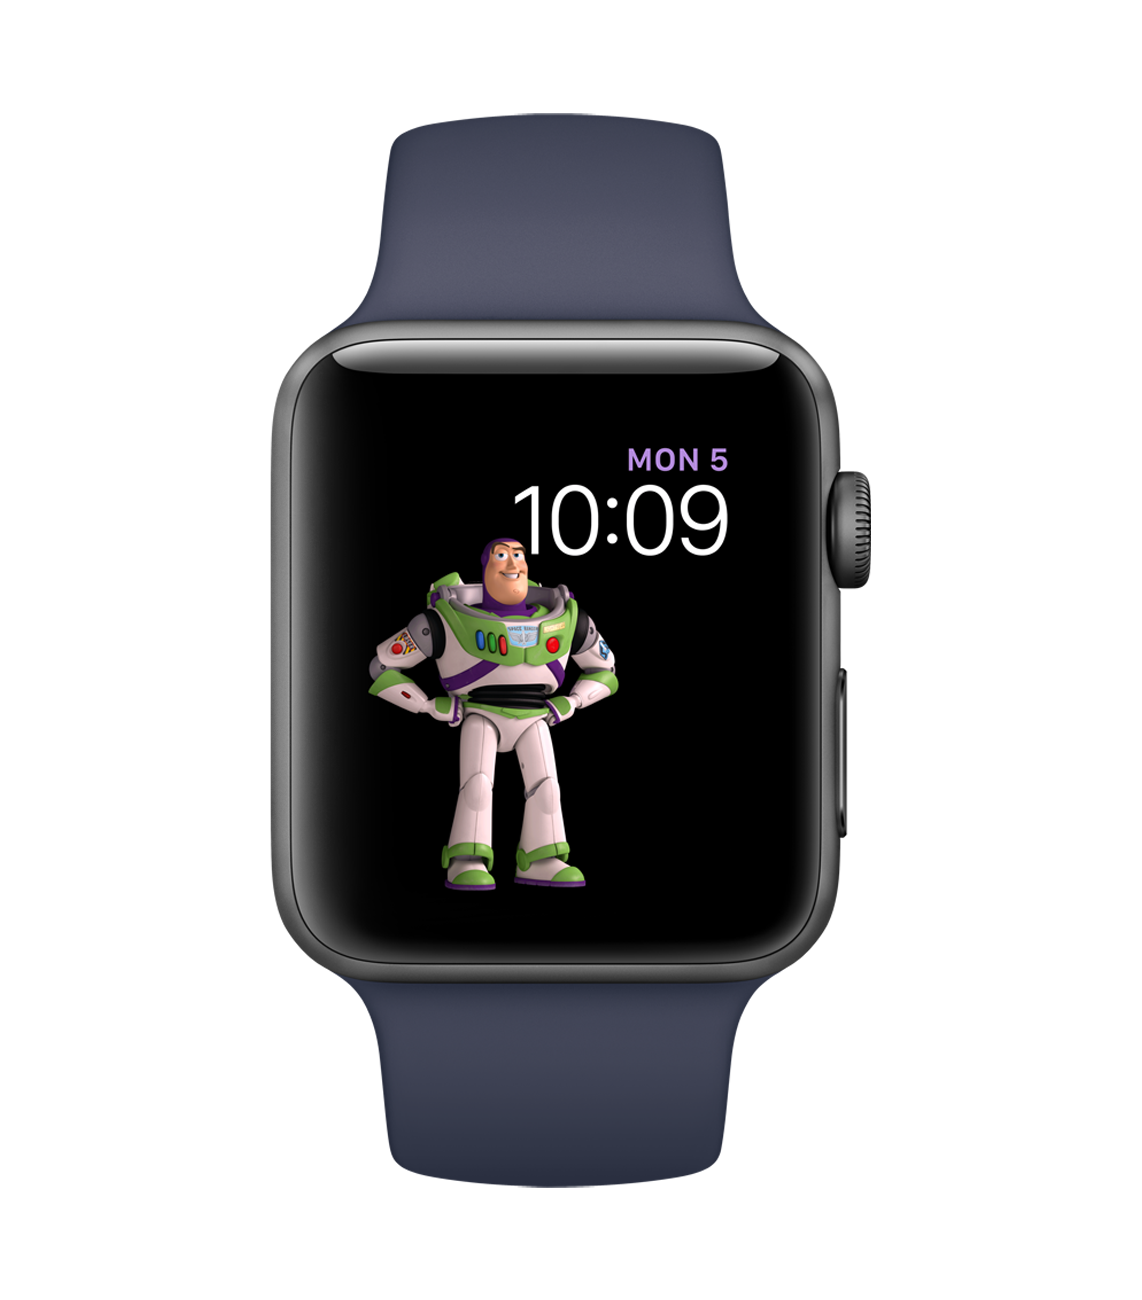 watchOS 4 Brings Improved Intelligence and Fitness Features to the Apple Watch